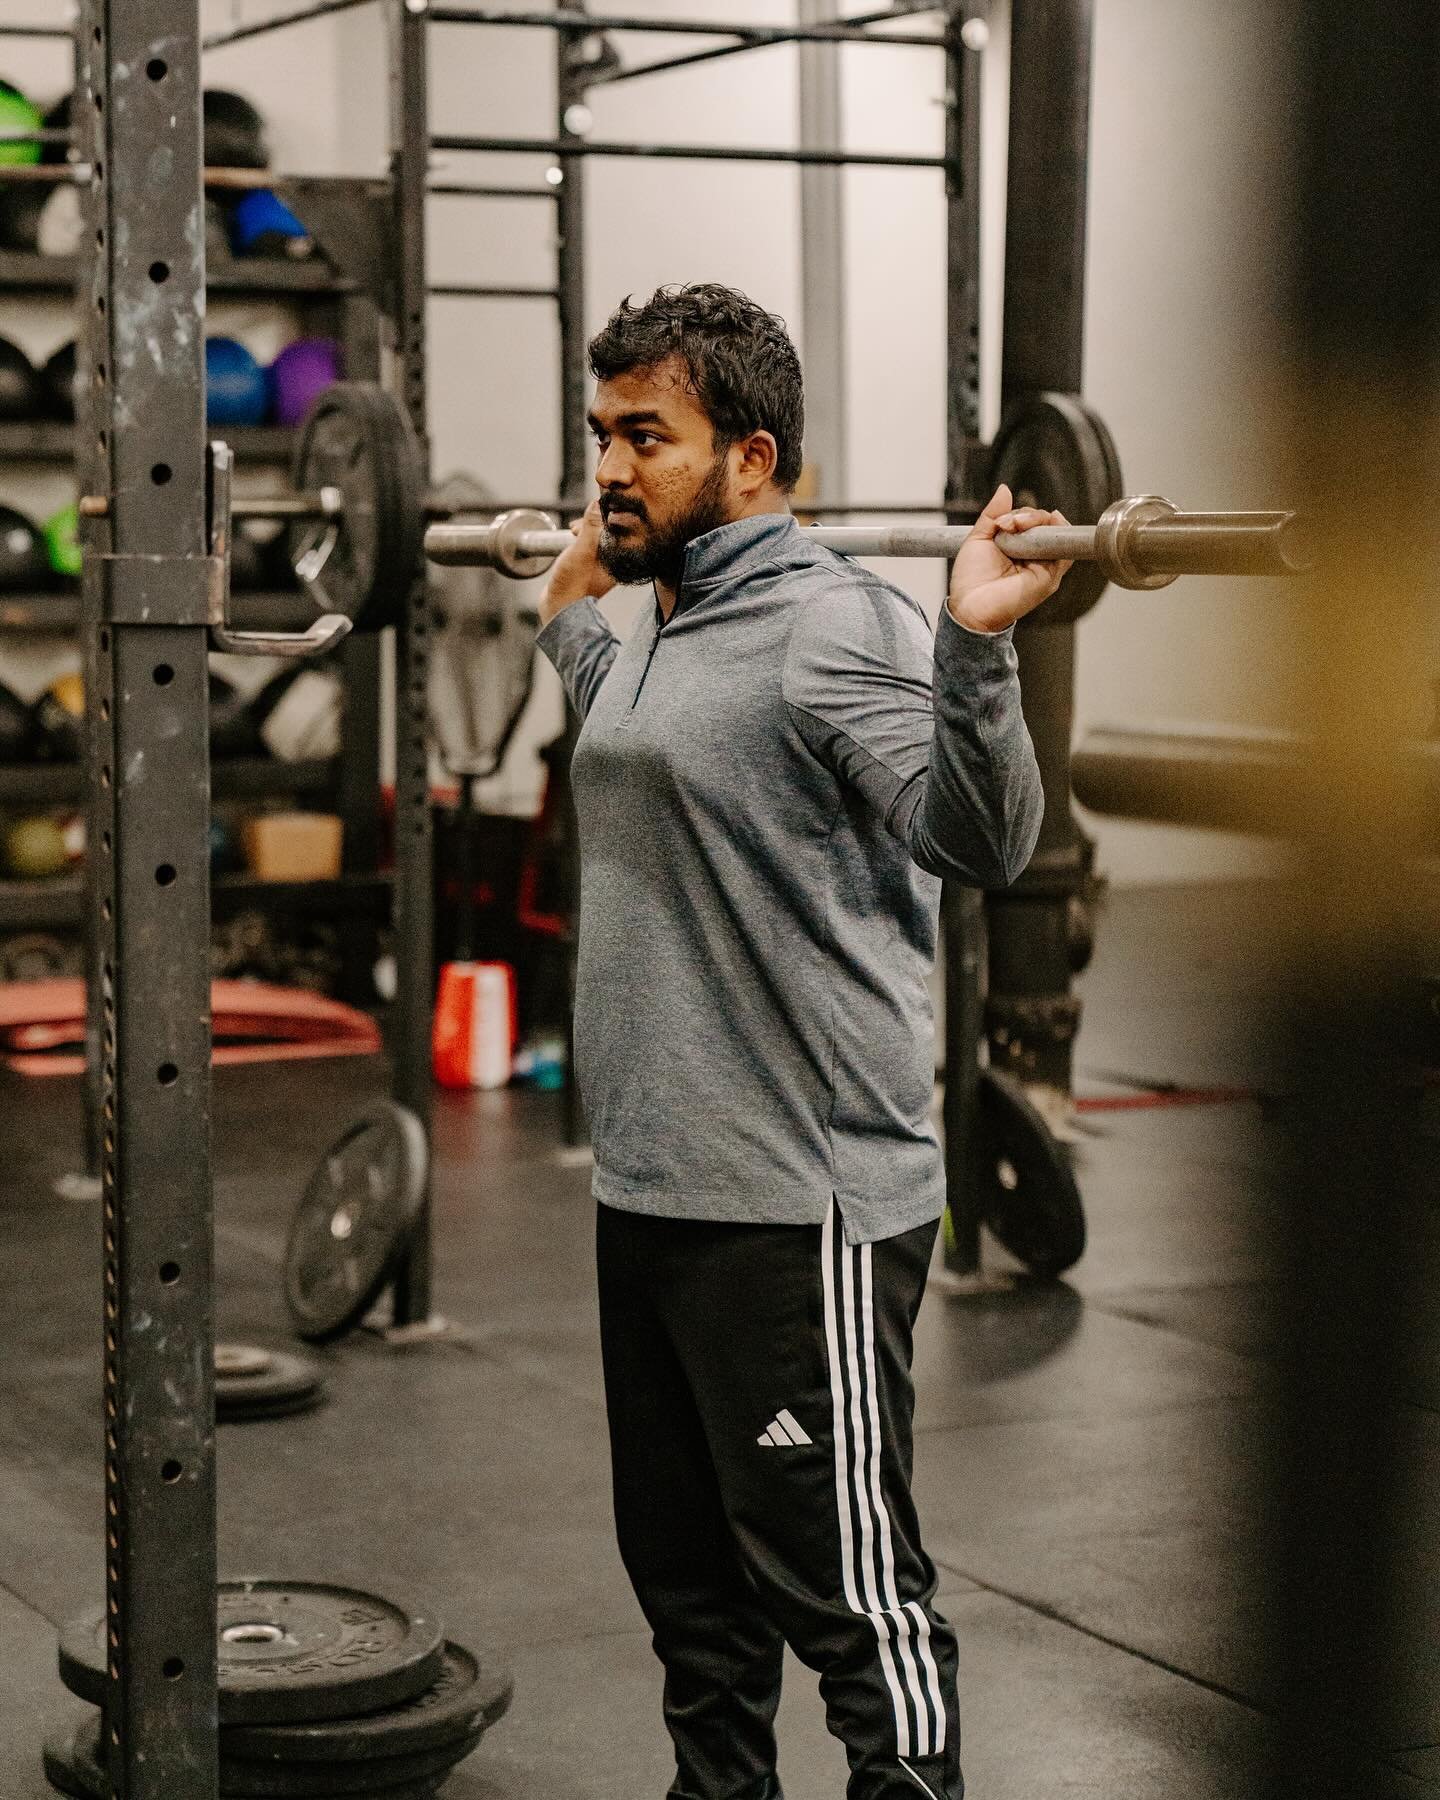 Technique and full range of motion before heavy loads is key for improved fitness and avoidance of injury. Our coaches at @cedarcitycrossfit will provide proper modifications and loads to meet you where you&rsquo;re at!

Come try it out for yourself 